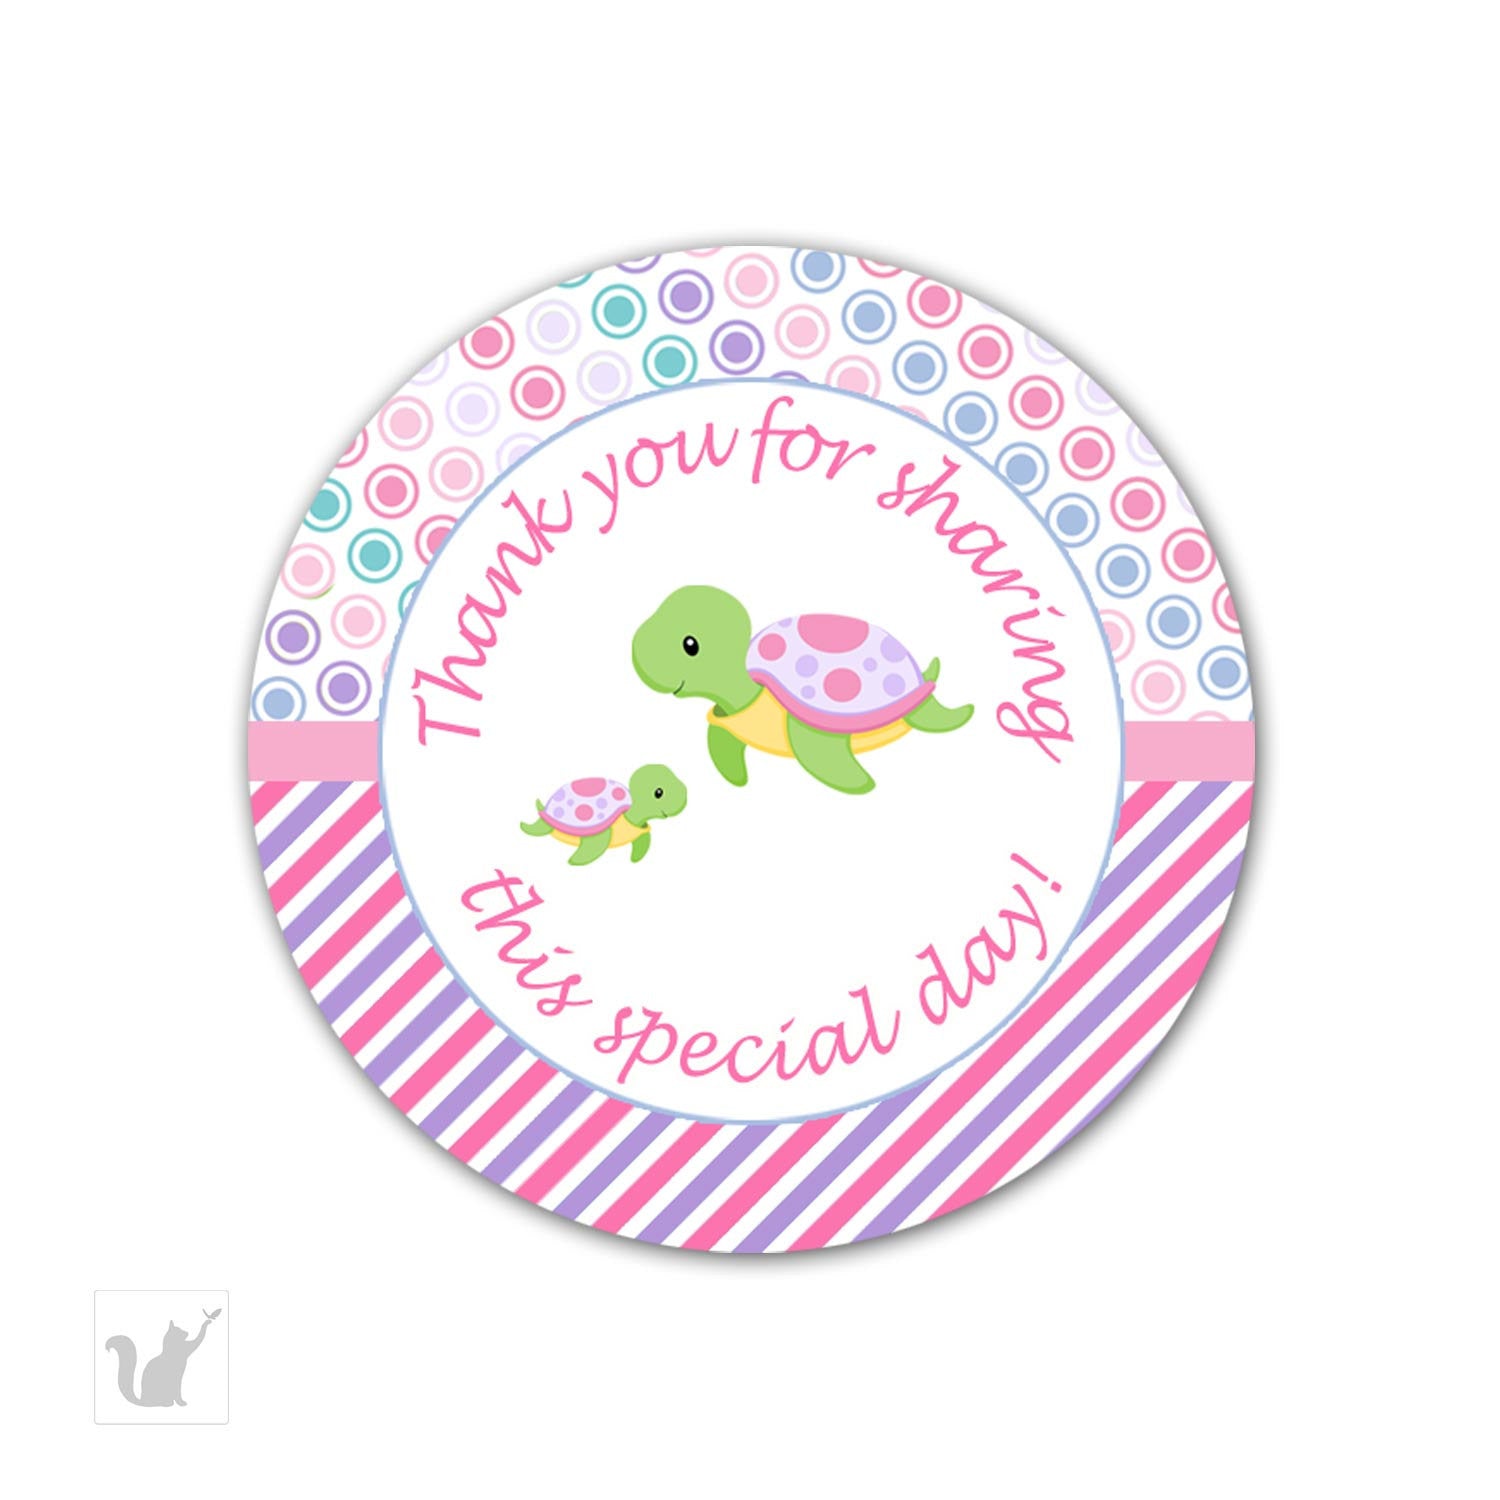 INSTANT DOWNLOAD Turtle Baby Shower Thank You Tag - Stripes Polka Dots Printable Decorations Round Party Stickers Girl Baby Shower Favors